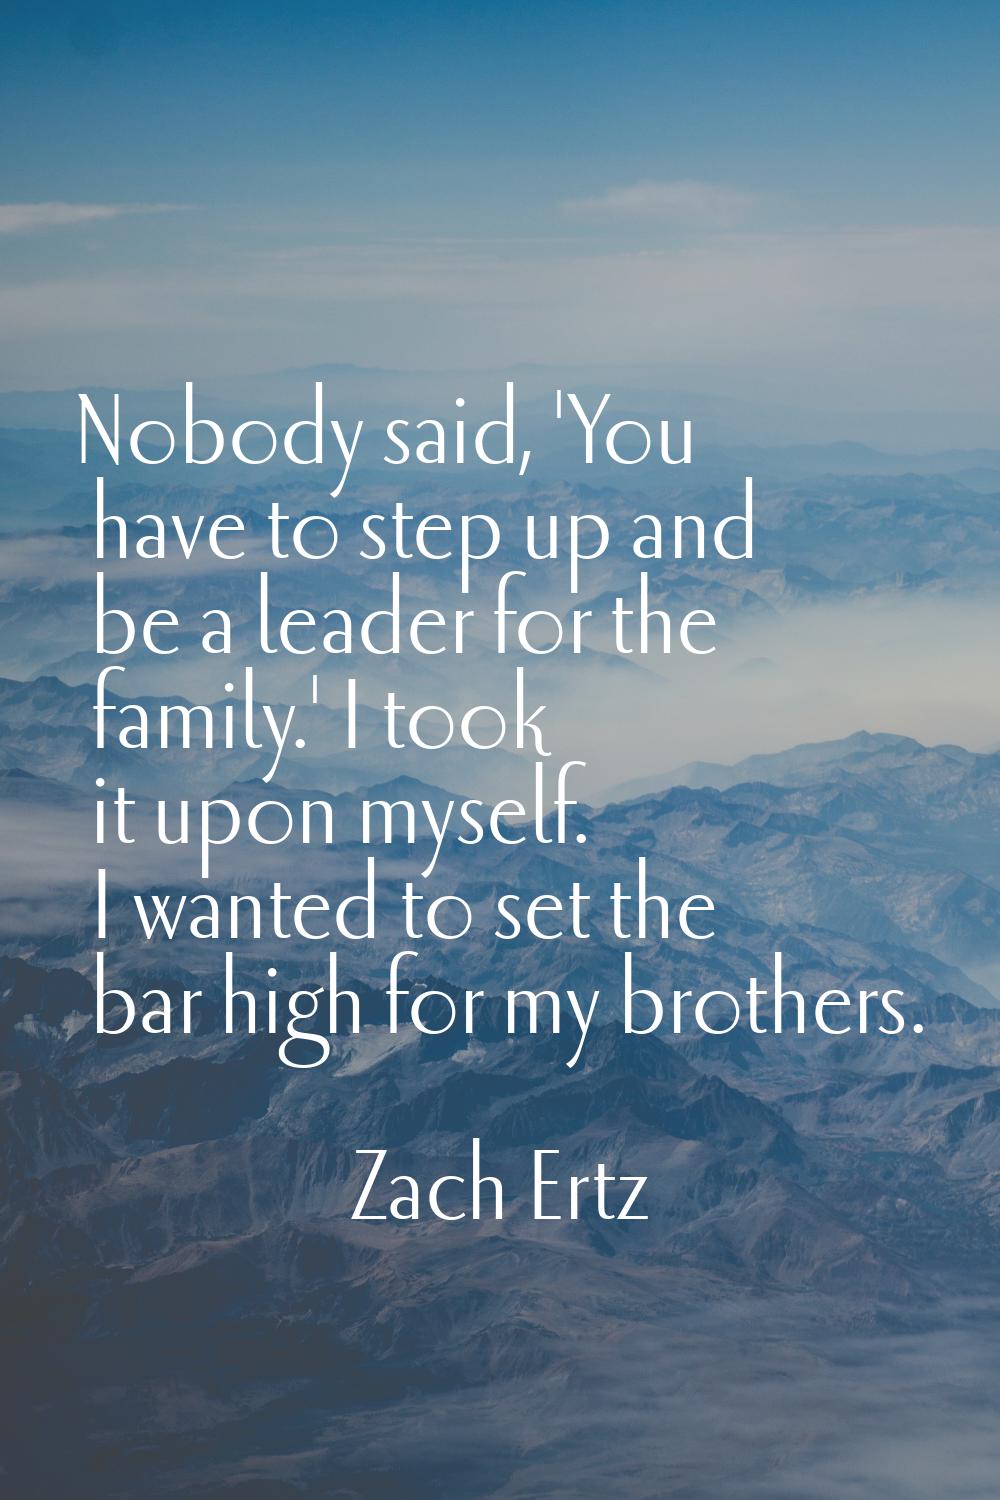 Nobody said, 'You have to step up and be a leader for the family.' I took it upon myself. I wanted 